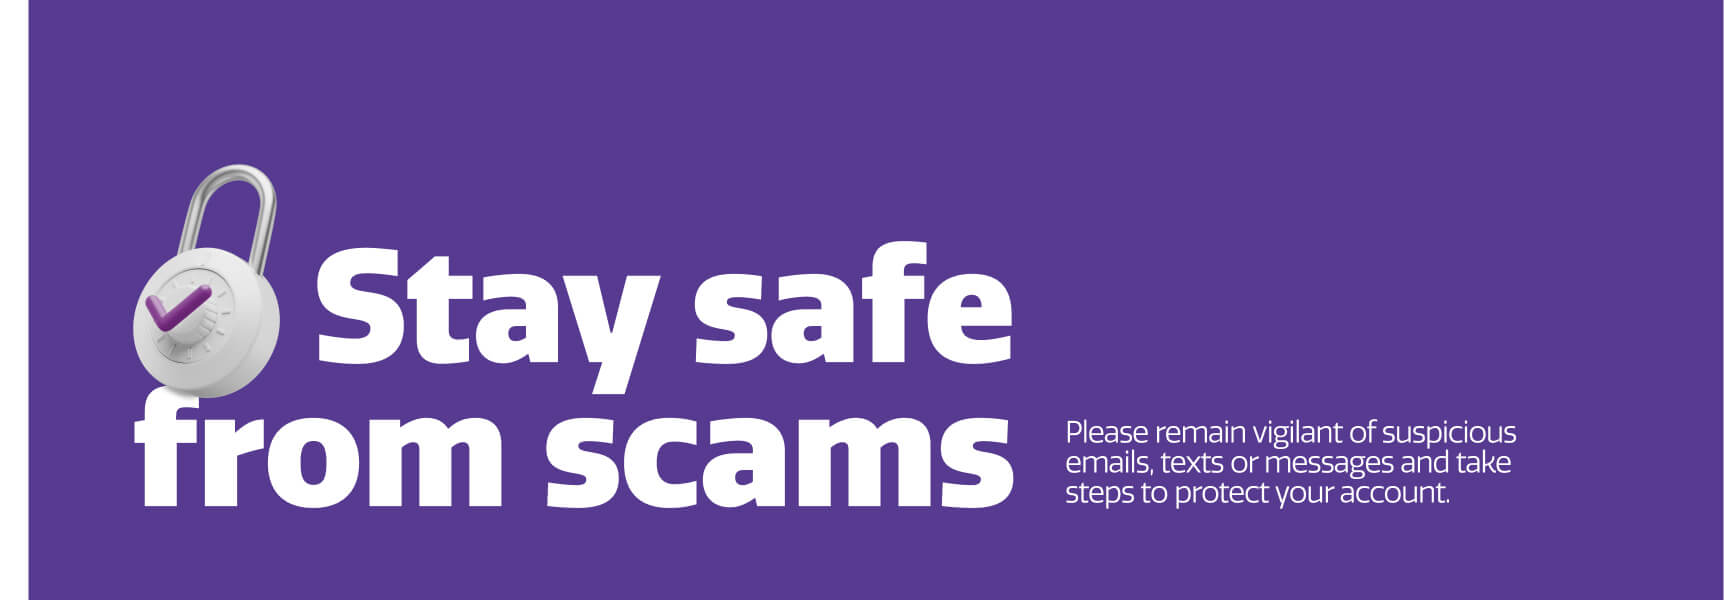 Stay safe from scams banner